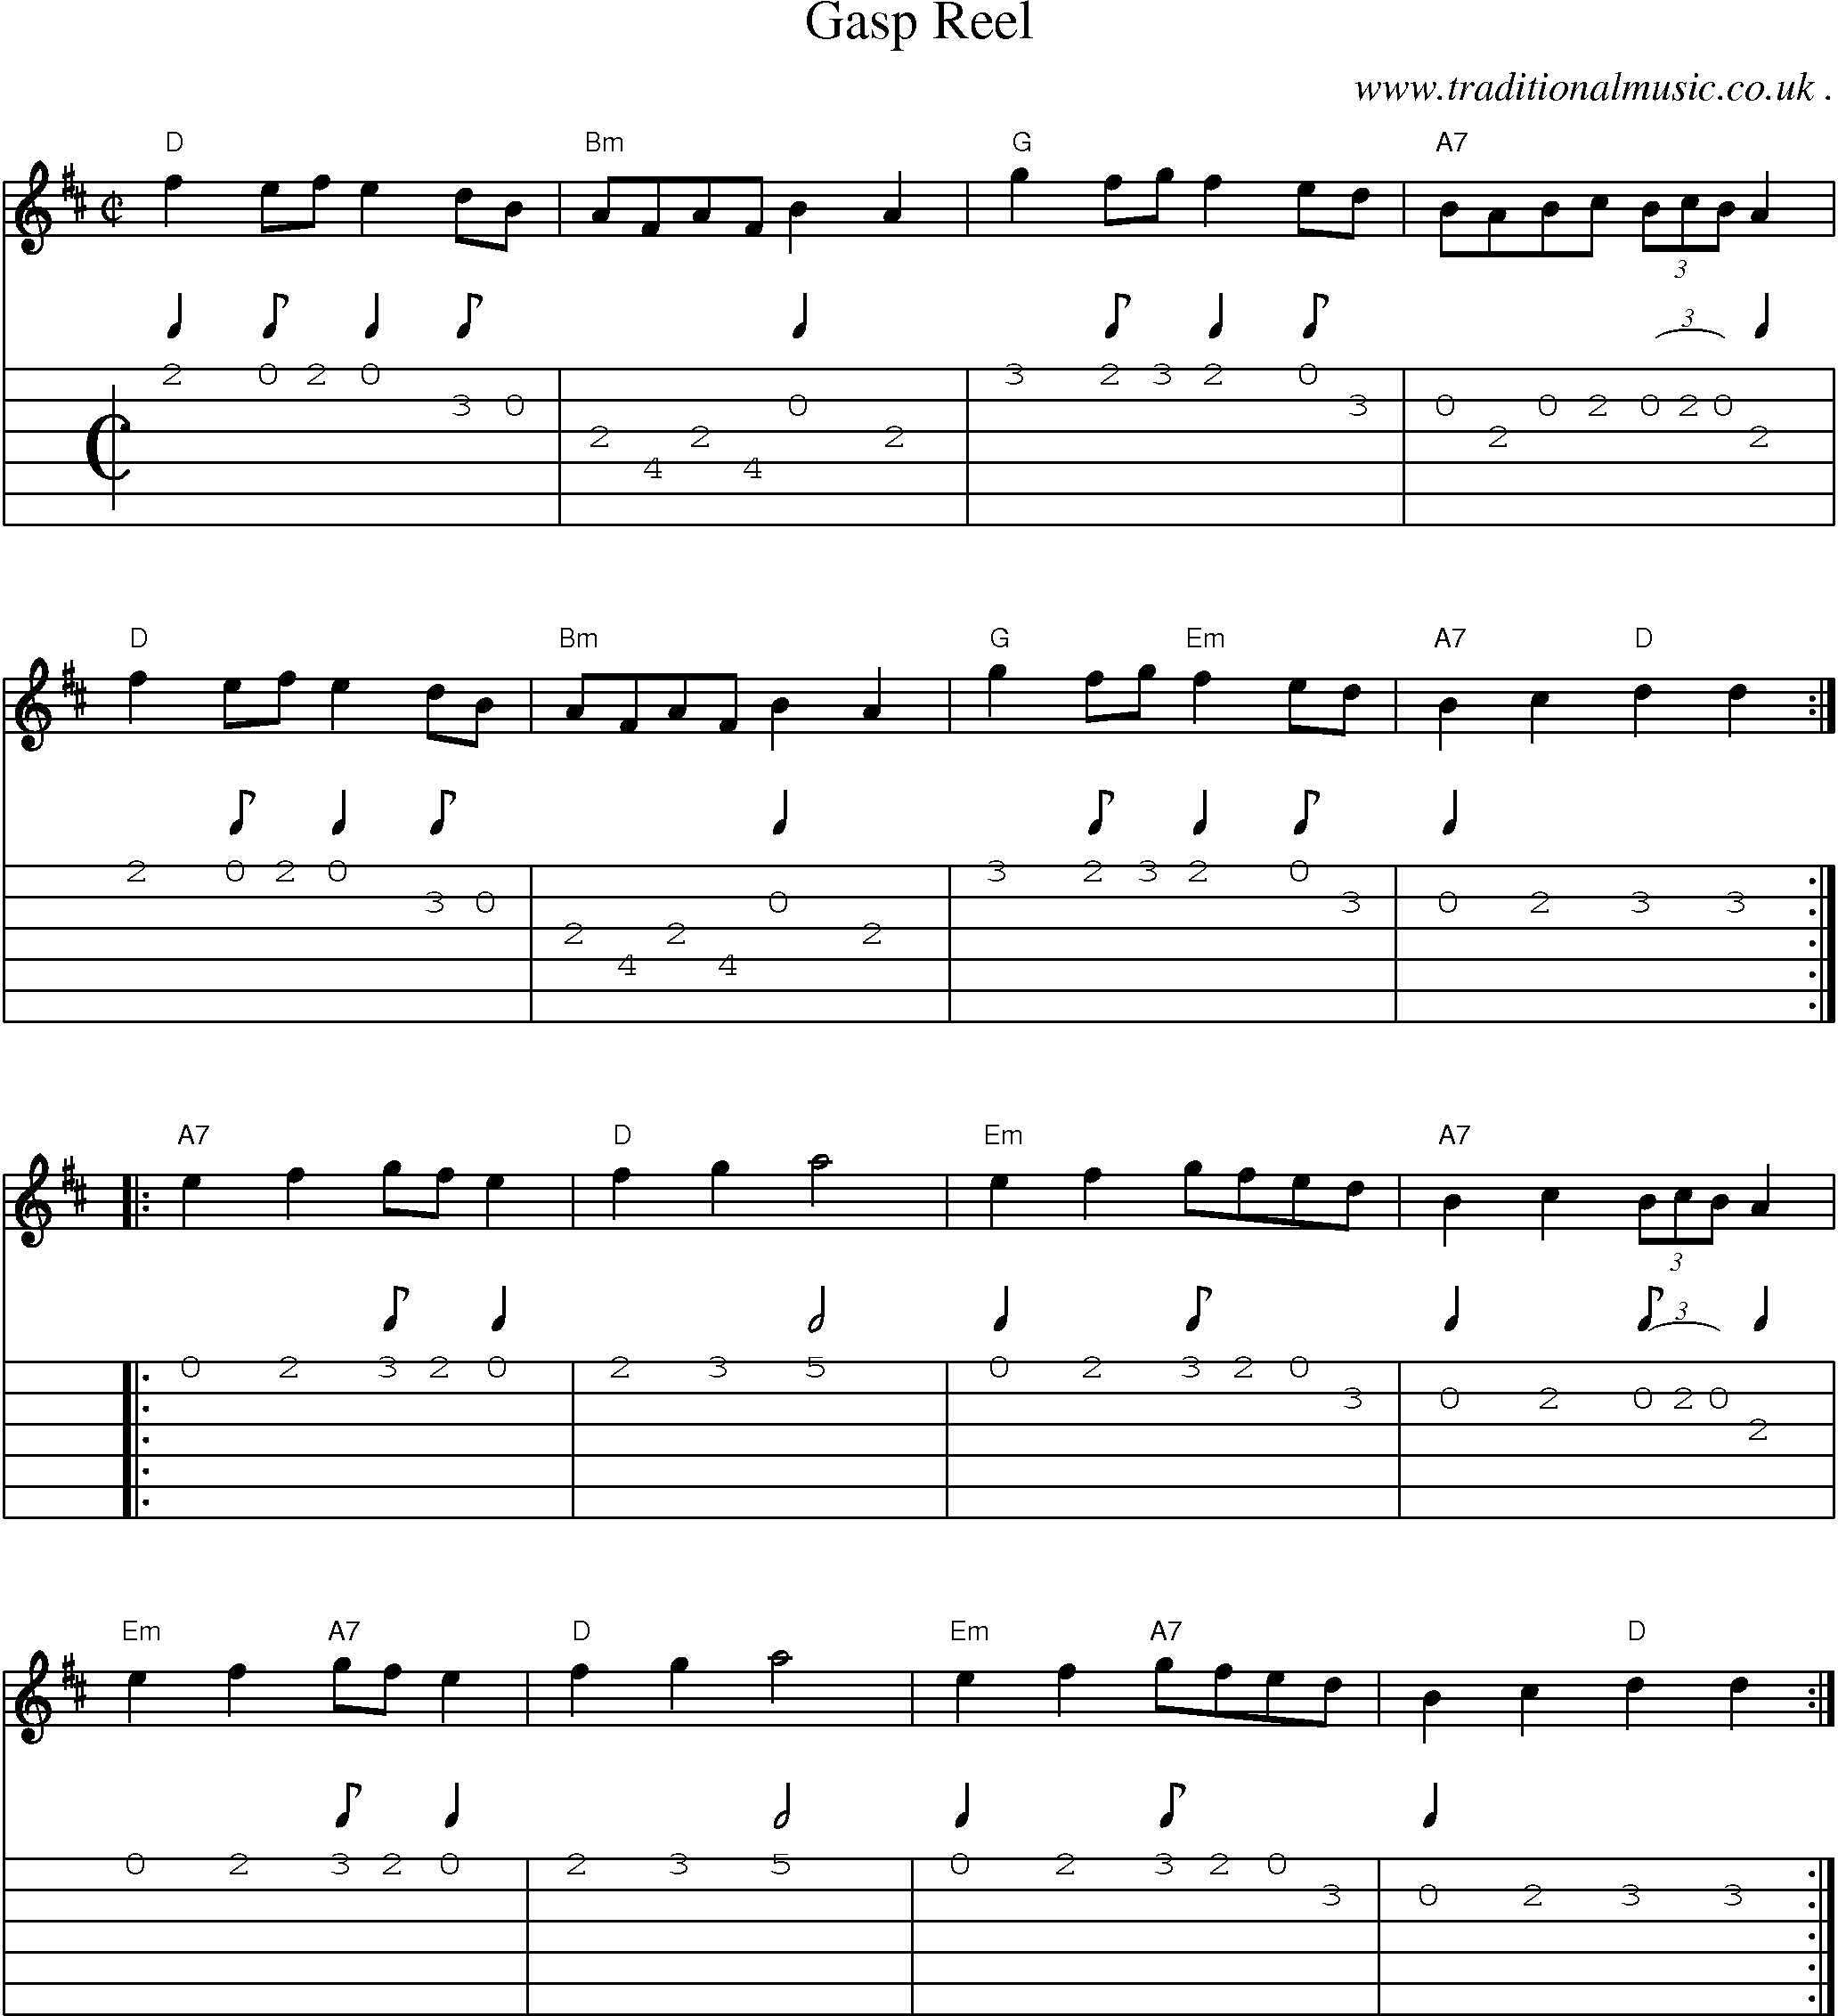 Music Score and Guitar Tabs for Gasp Reel